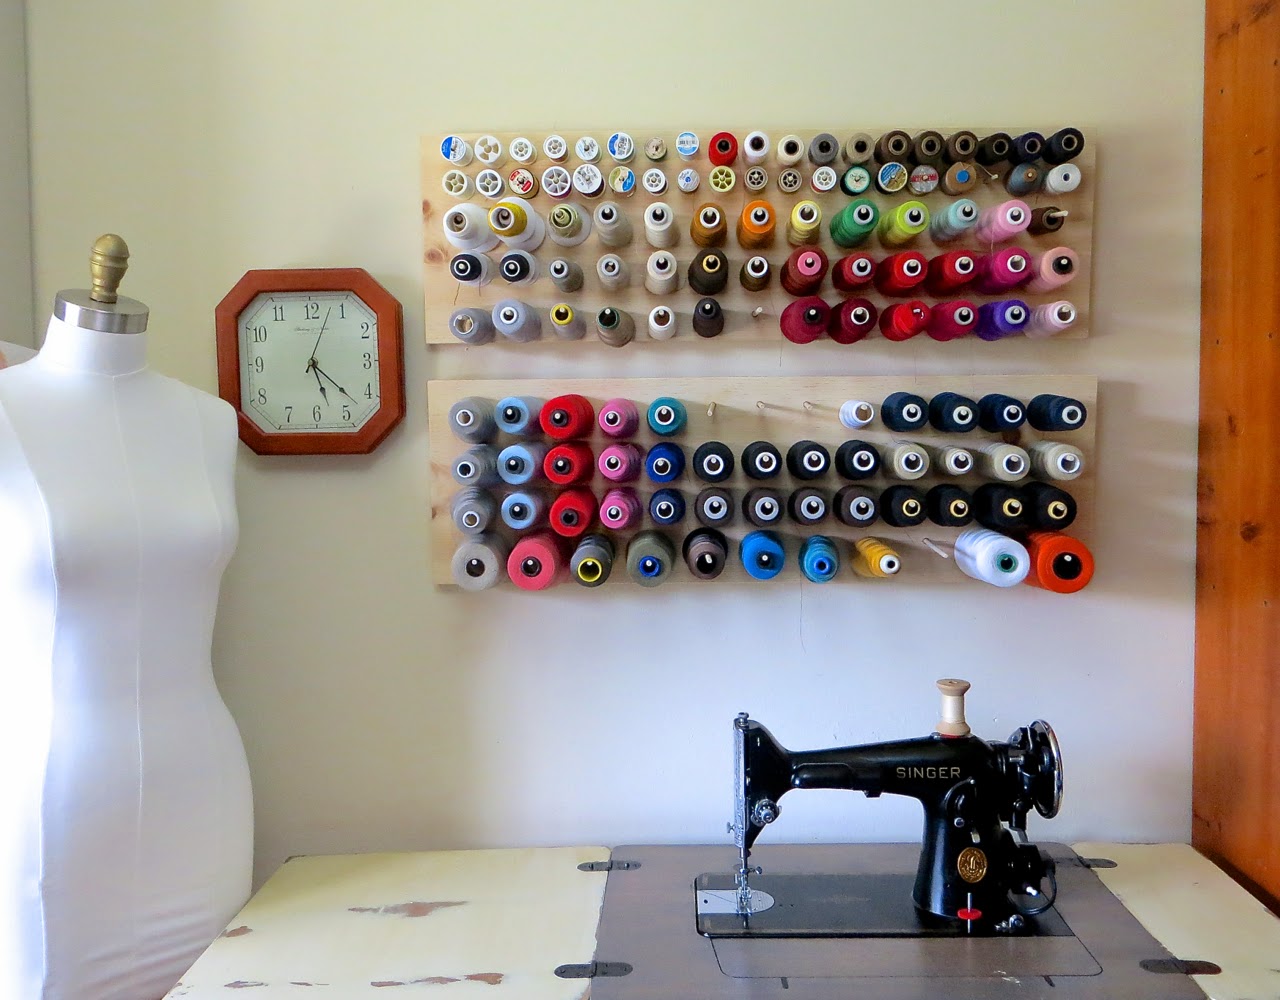 Thread Storage Spindles - safely store and transport your sewing supplies